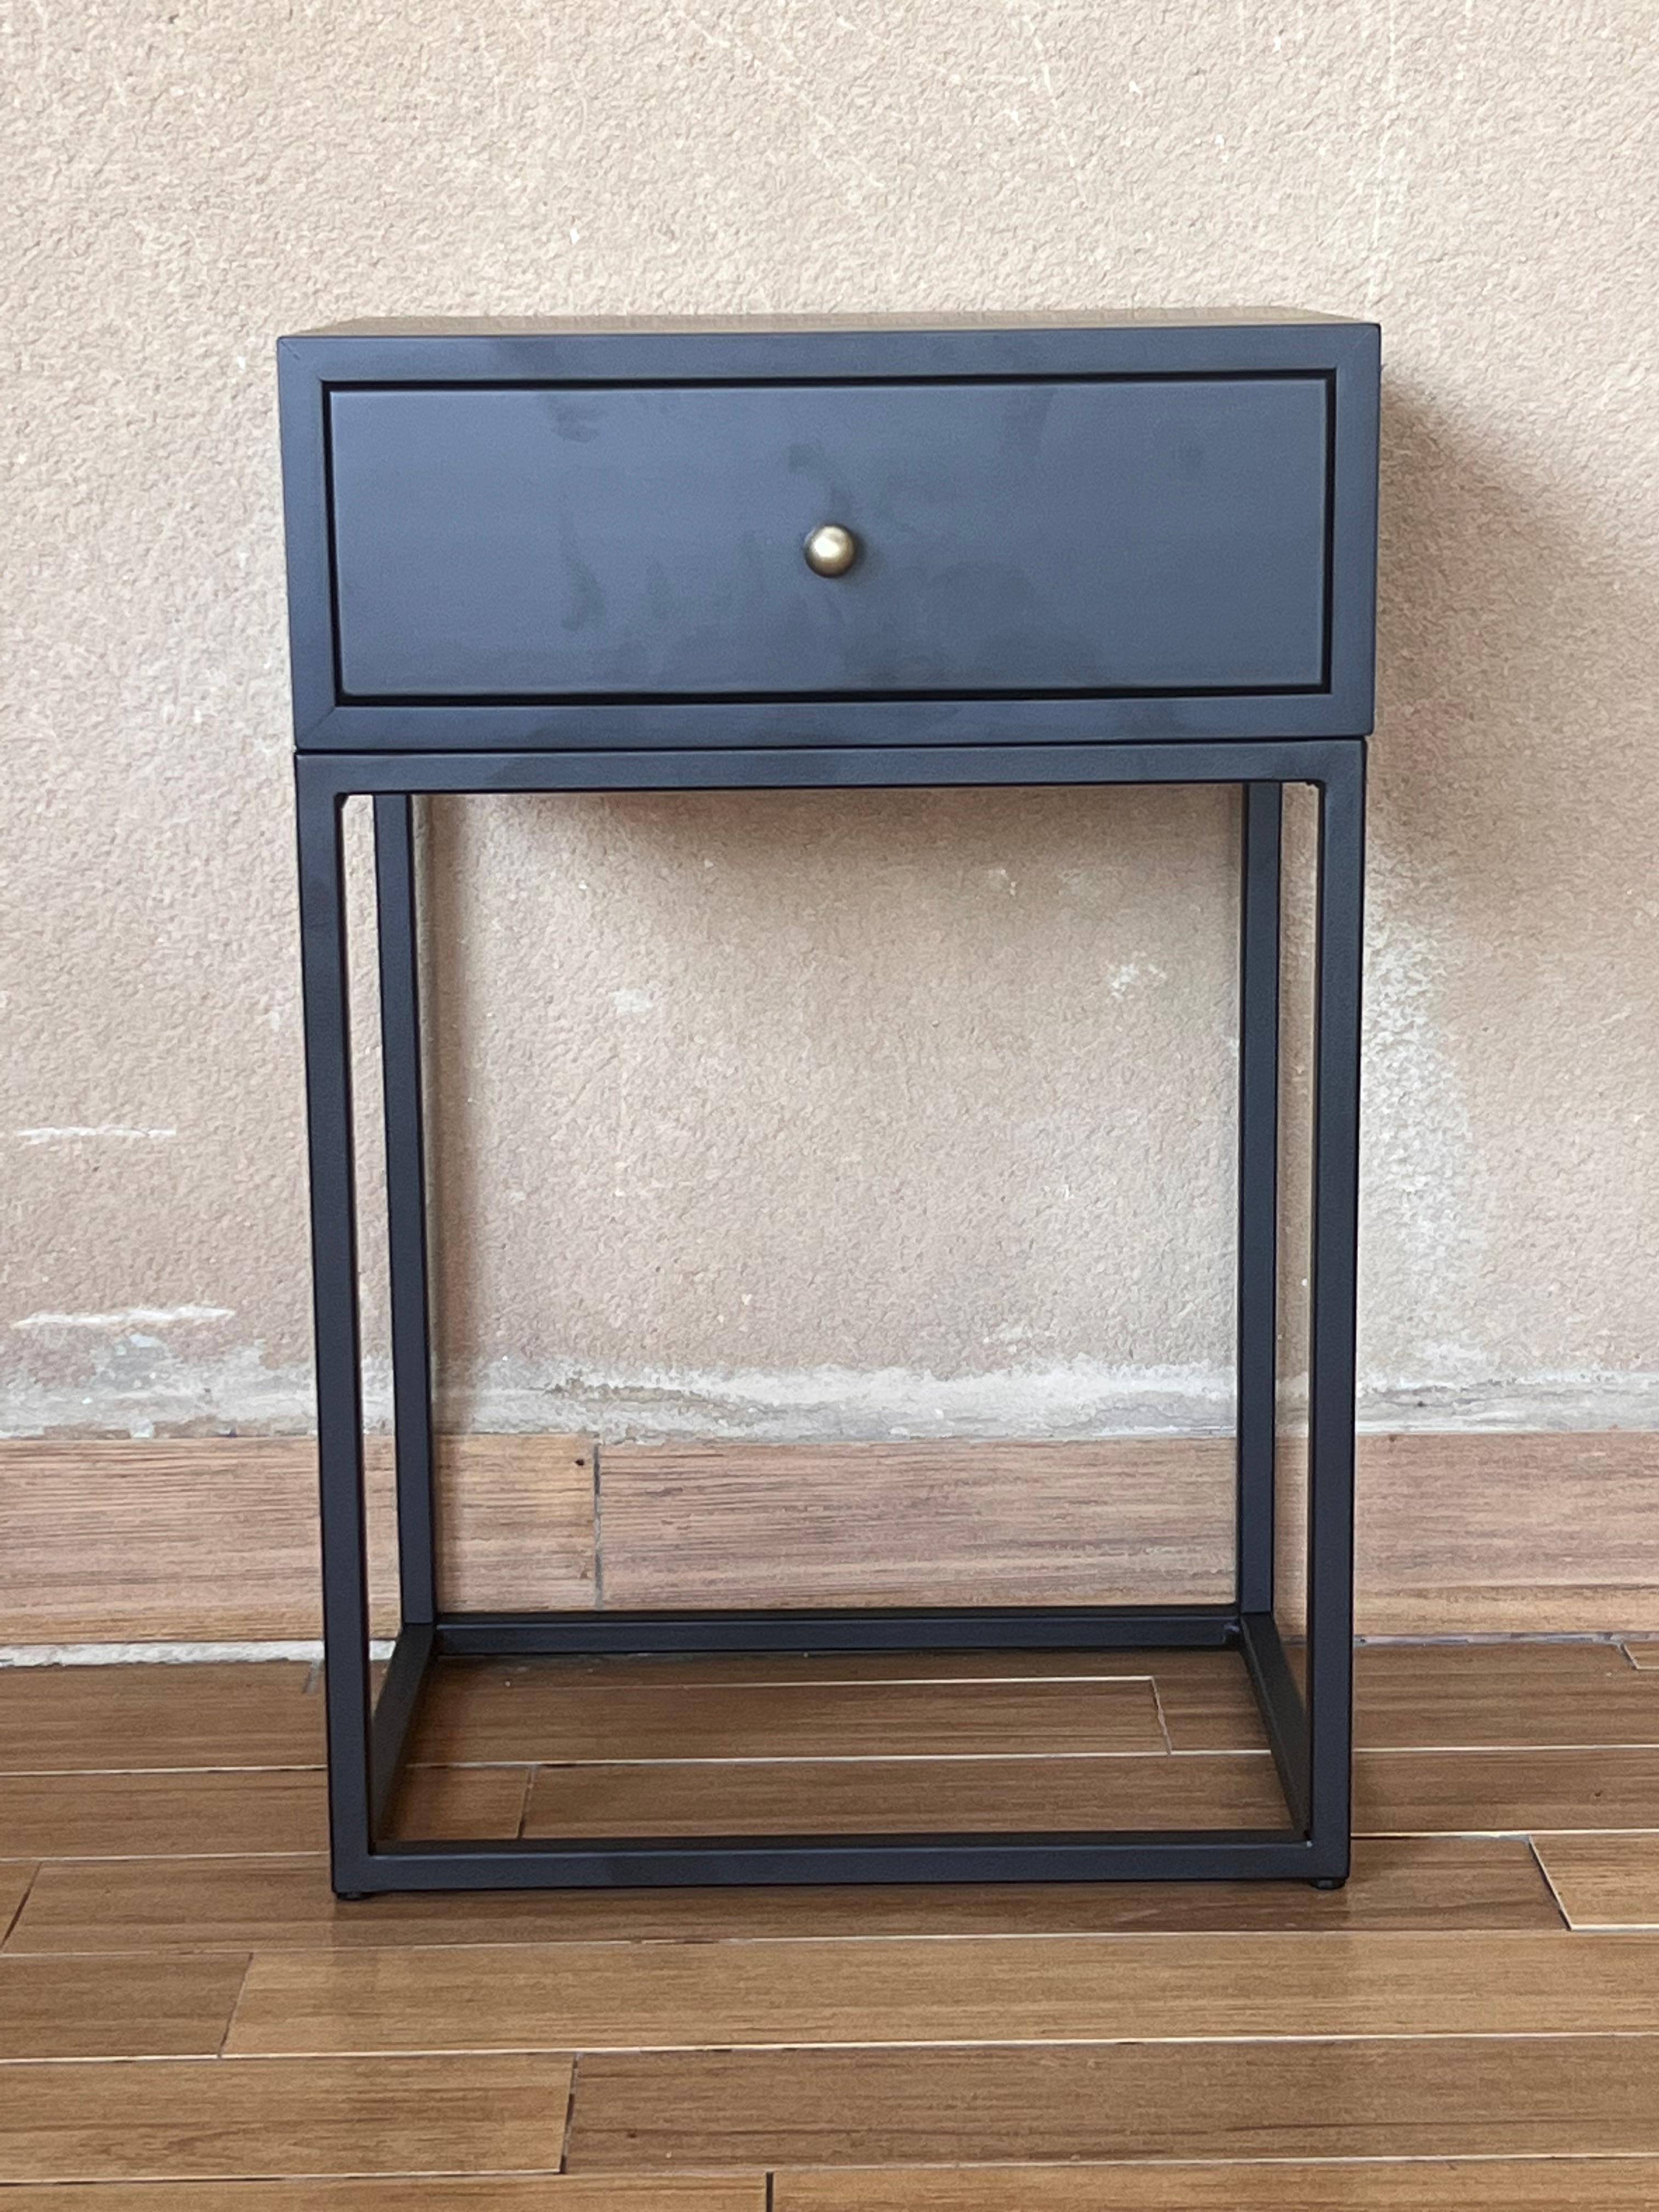 Beautiful pair of nightstands inspired in Paul McCobb planner group #1500  end tables 
Metal Chrome pull knobs.  Black lacquer finish on Spanish pine. Very modern designed pair of nightstands with iron base with 4 legs and stretcher .
You can